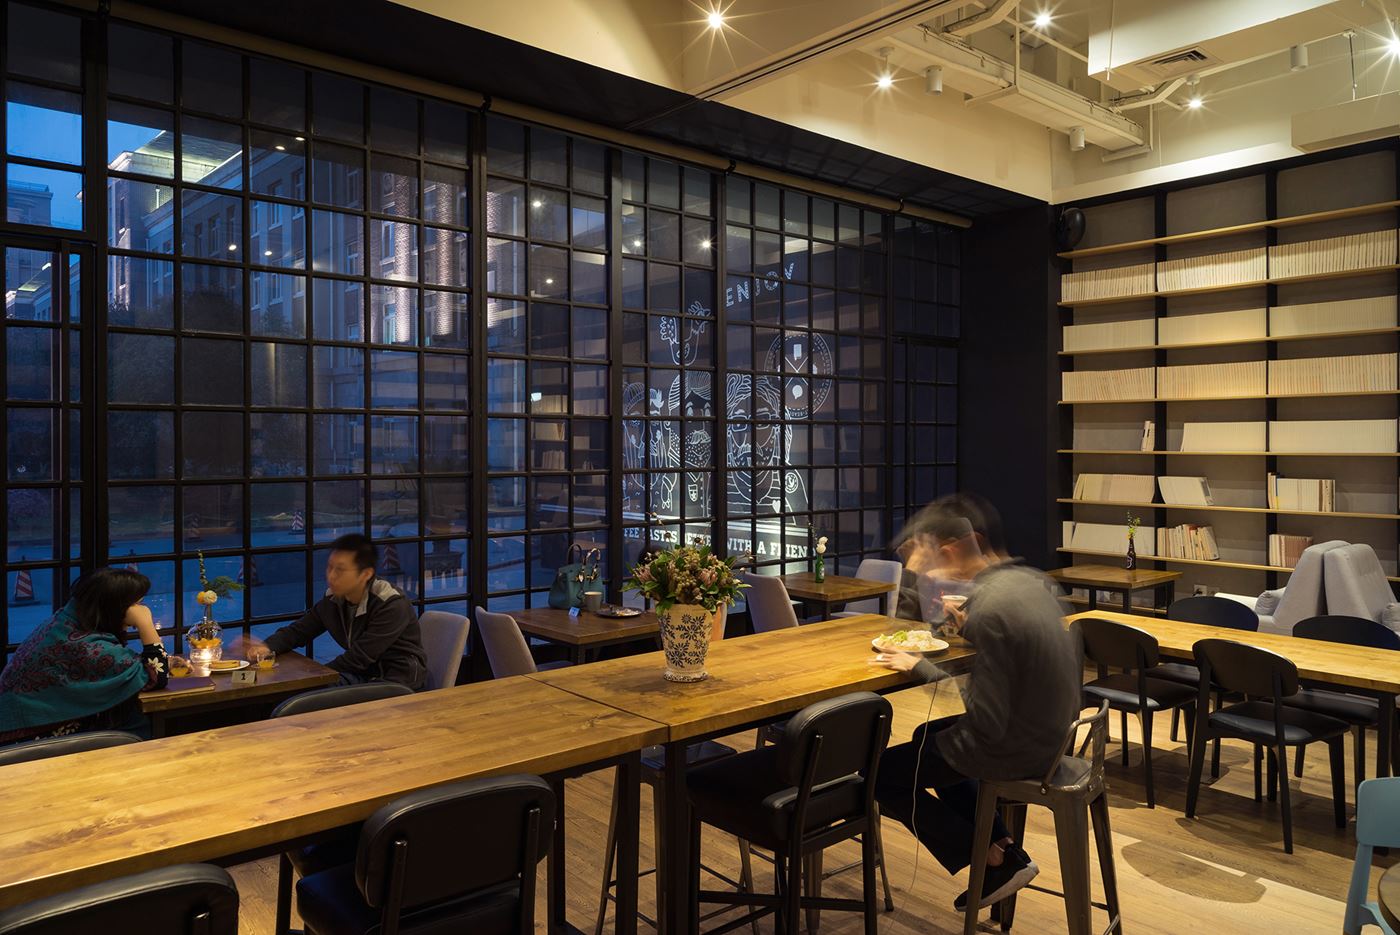 Underline Cafe in Hangzhou, China by LYCS Architecture